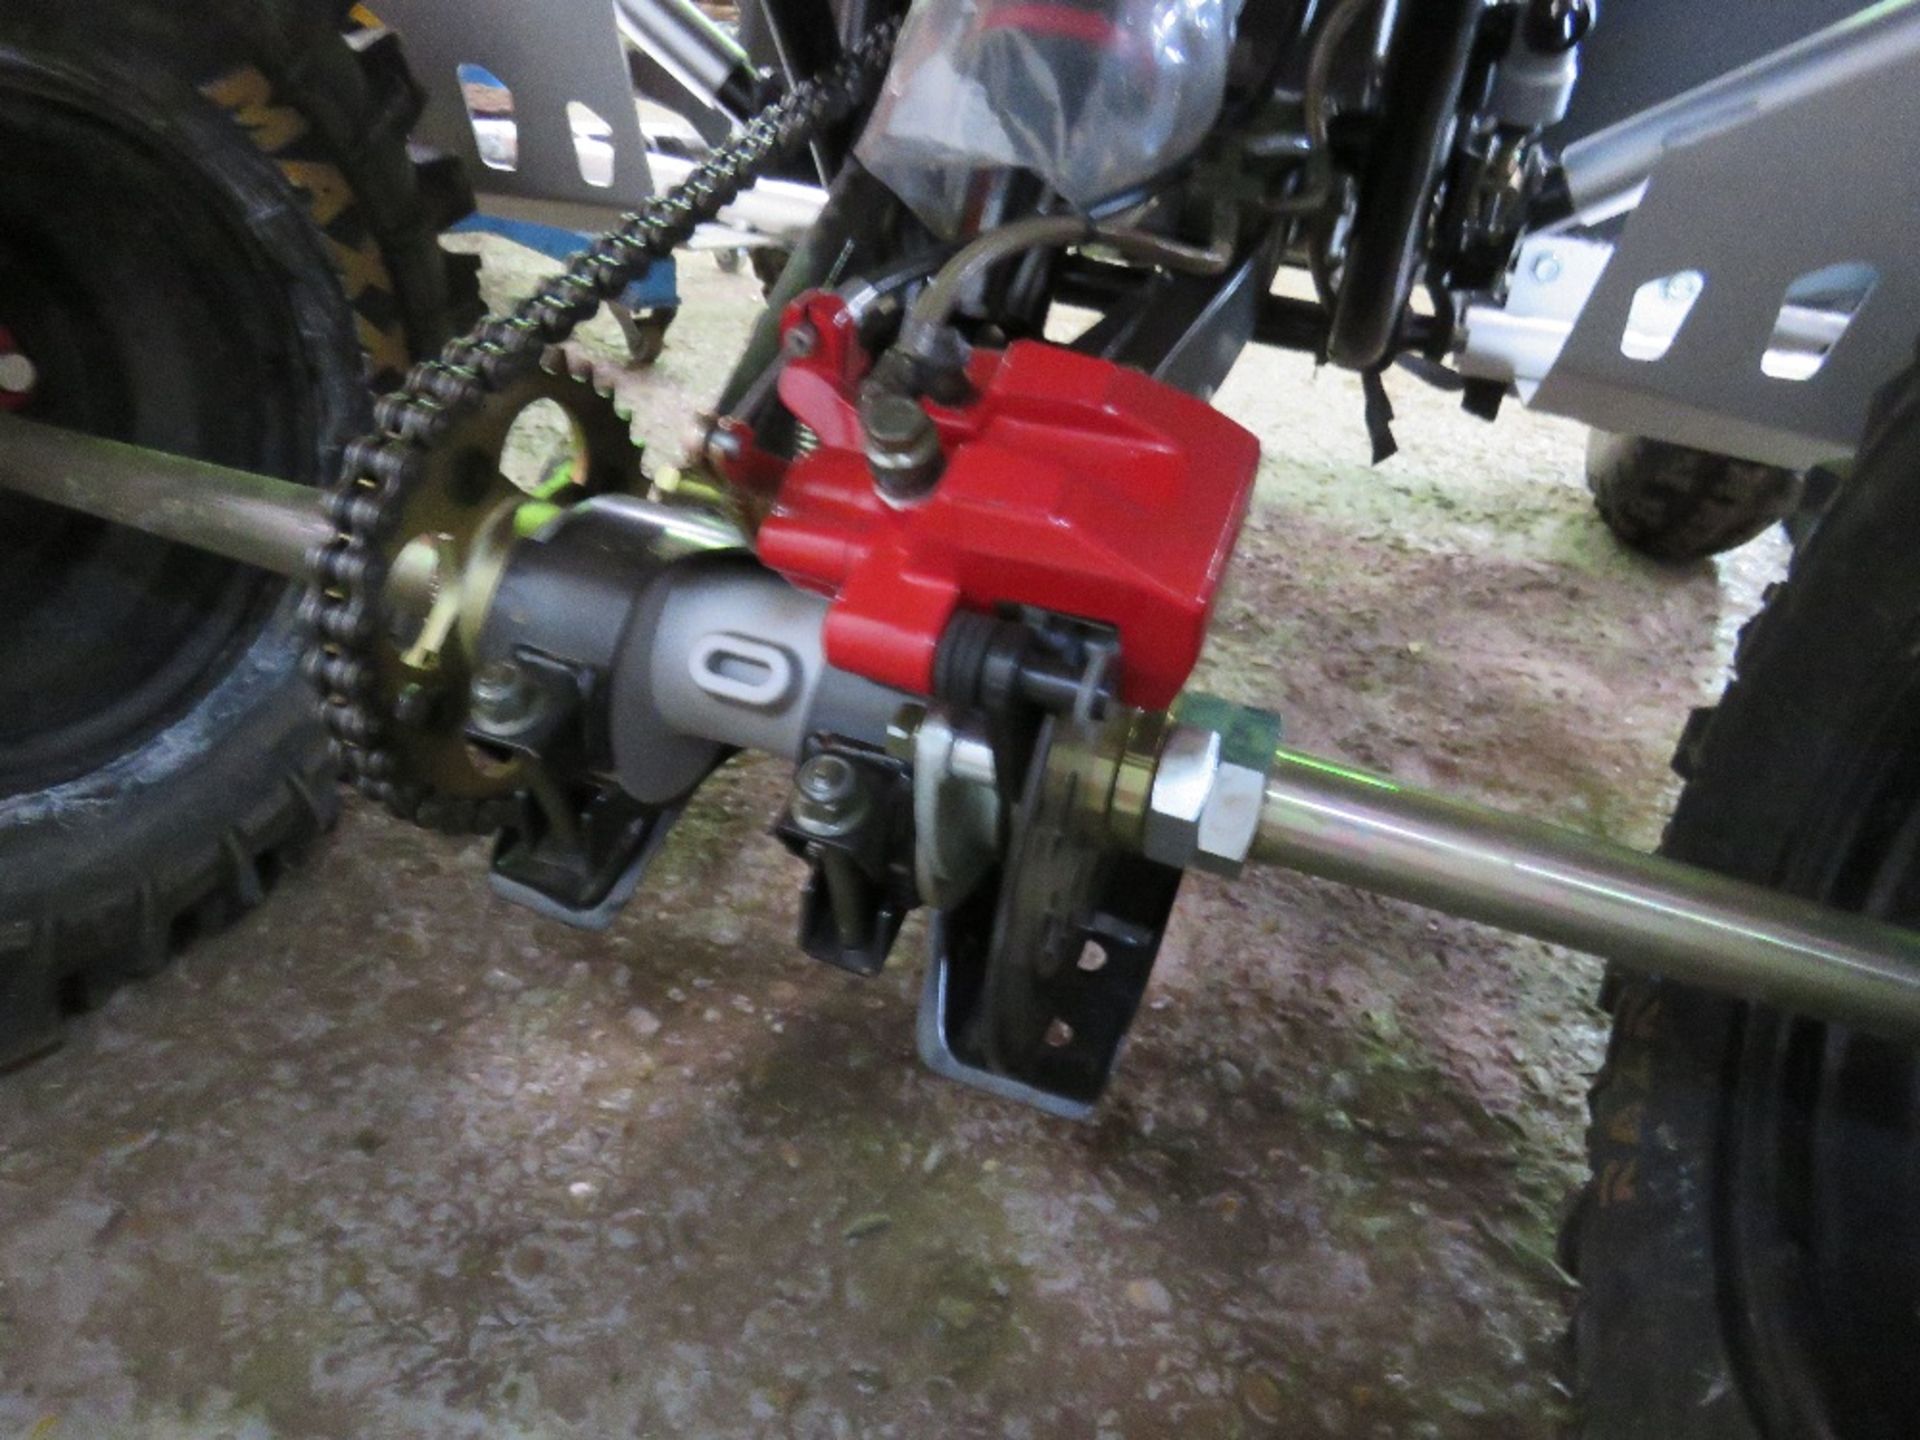 AEON 400 SPORT/ QUADZILLA RACING QUAD BIKE. 1MILE FROM NEW, UNWANTED GIFT. - Image 6 of 7